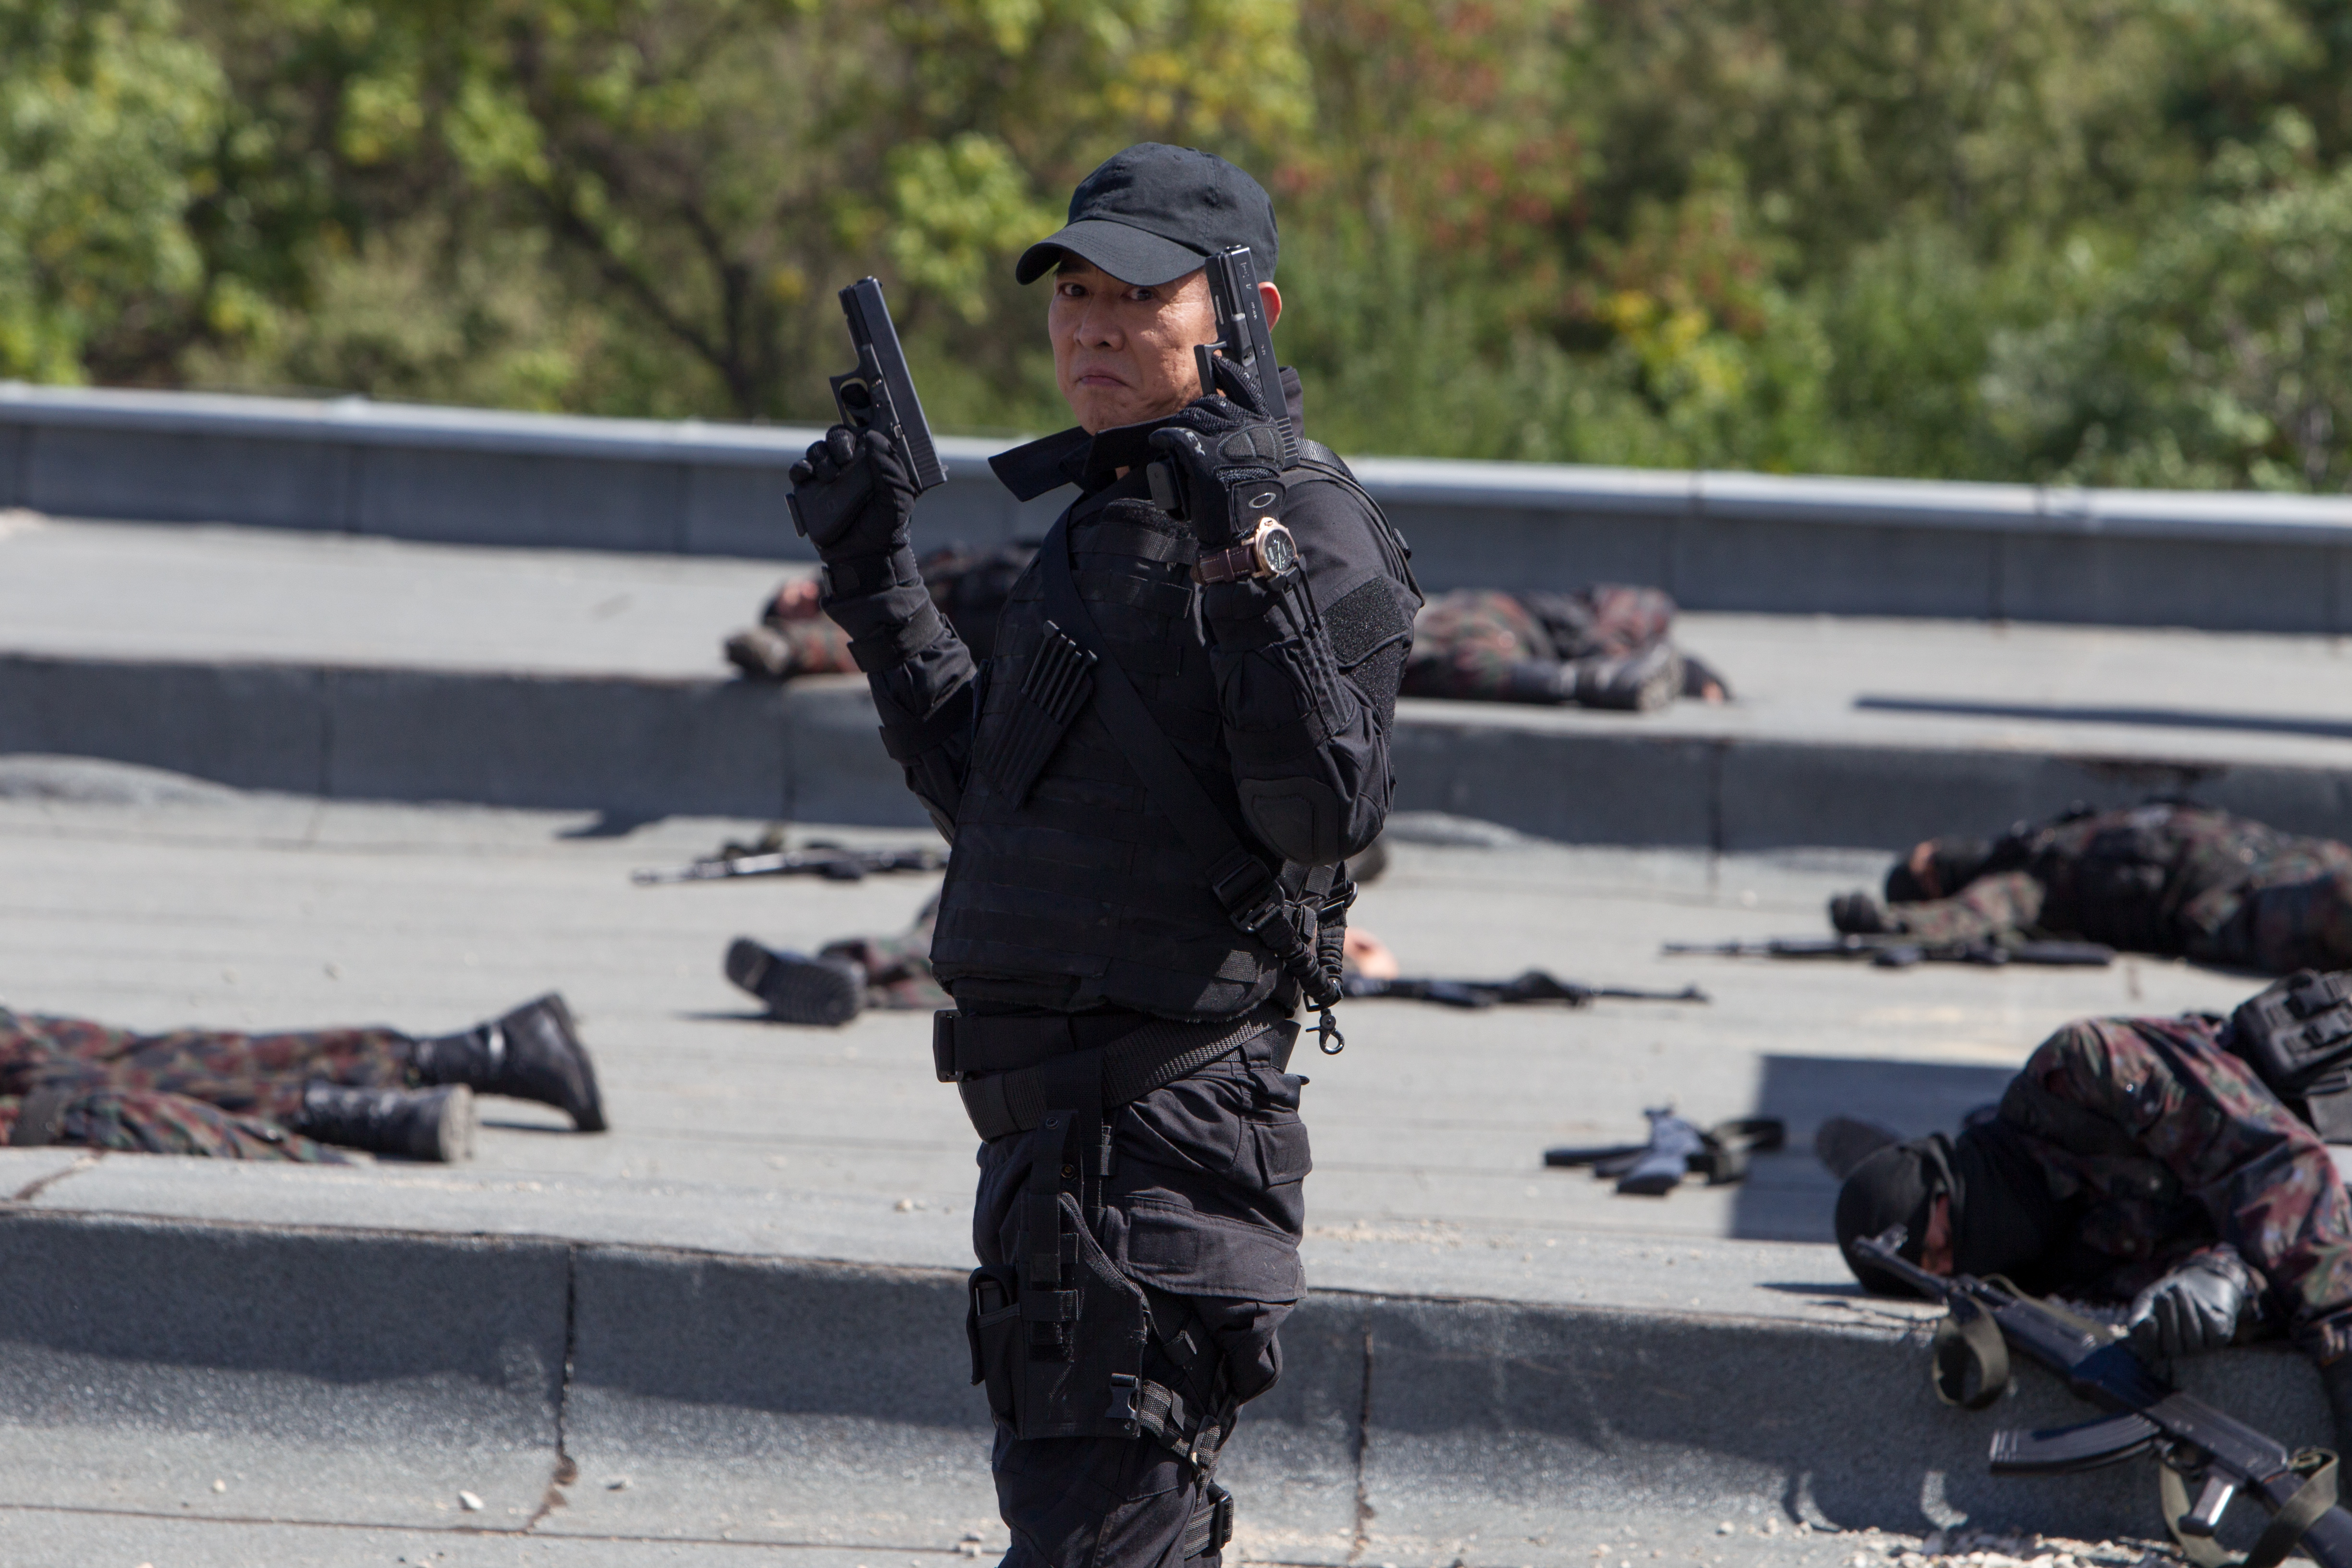 The Expendables 3 Jet Li Yin Yang The Expendables 4896x3264